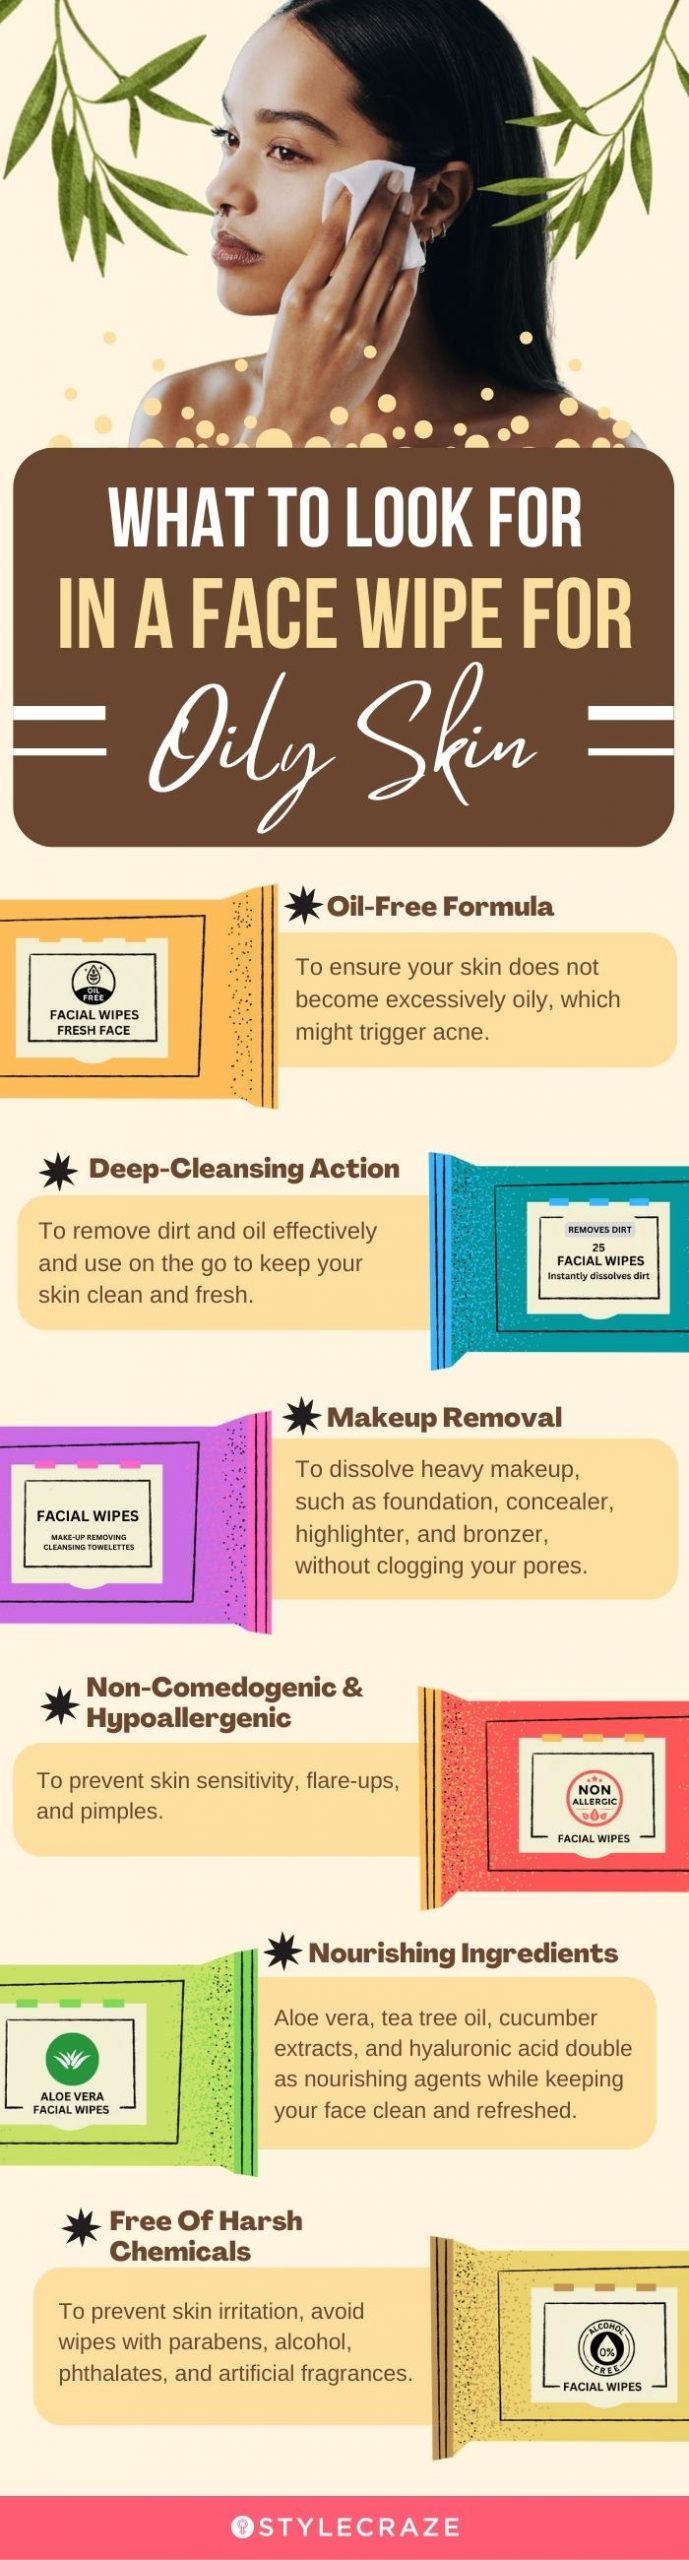 What To Look For In A Face Wipe For Oily Skin [infographic]